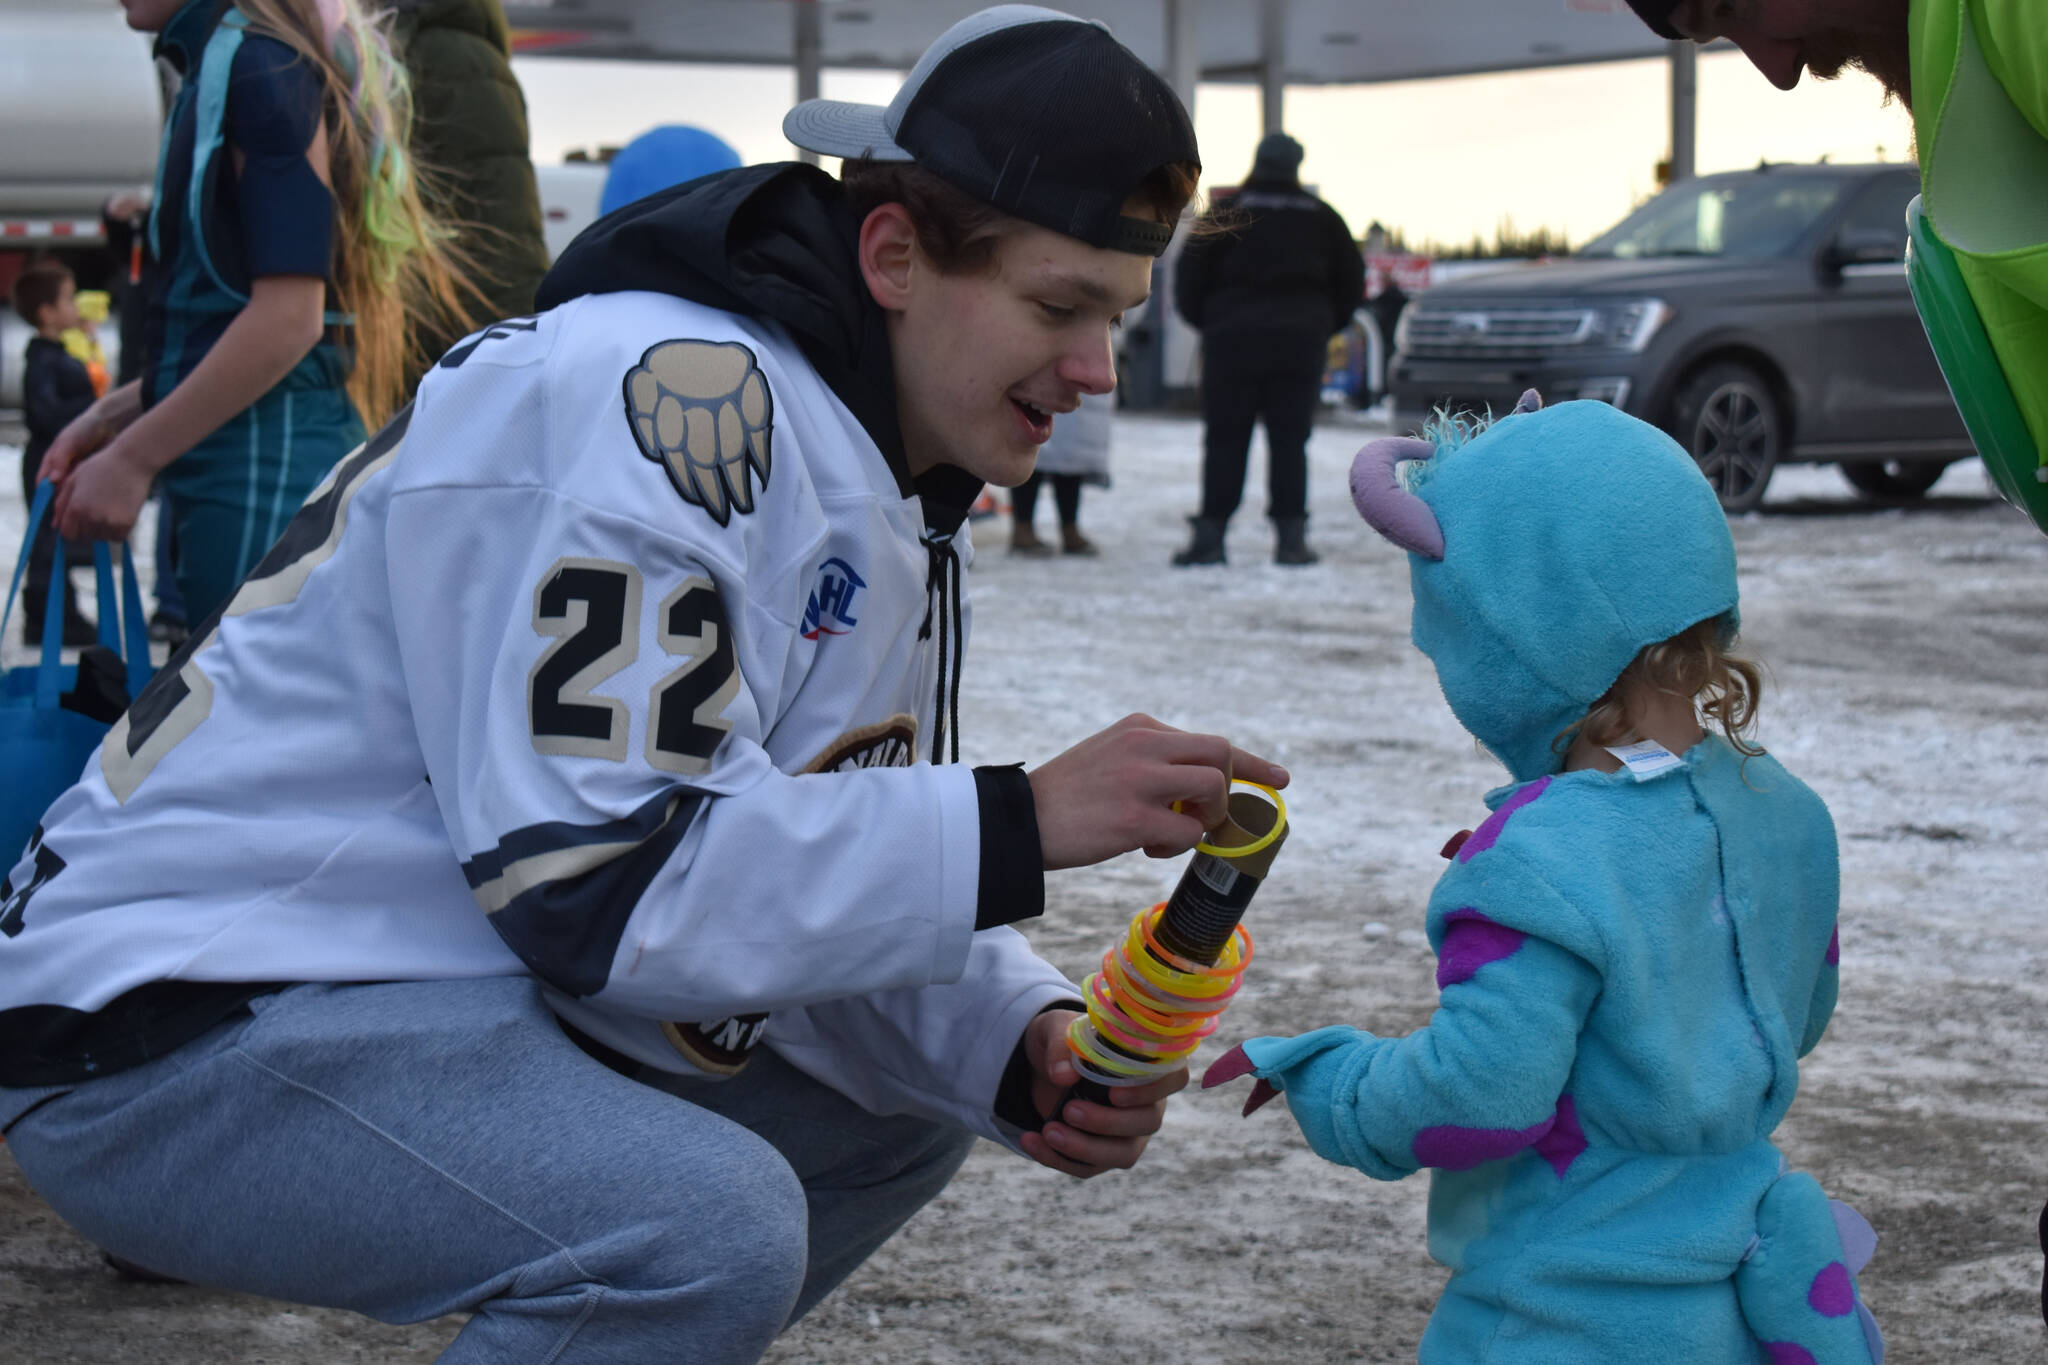 Ashton Christman hands out glow bracelets at the Orca Theater’s Trunk or Treat in Soldotna, Alaska, on Monday, Oct. 31, 2022. (Jake Dye/Peninsula Clarion)